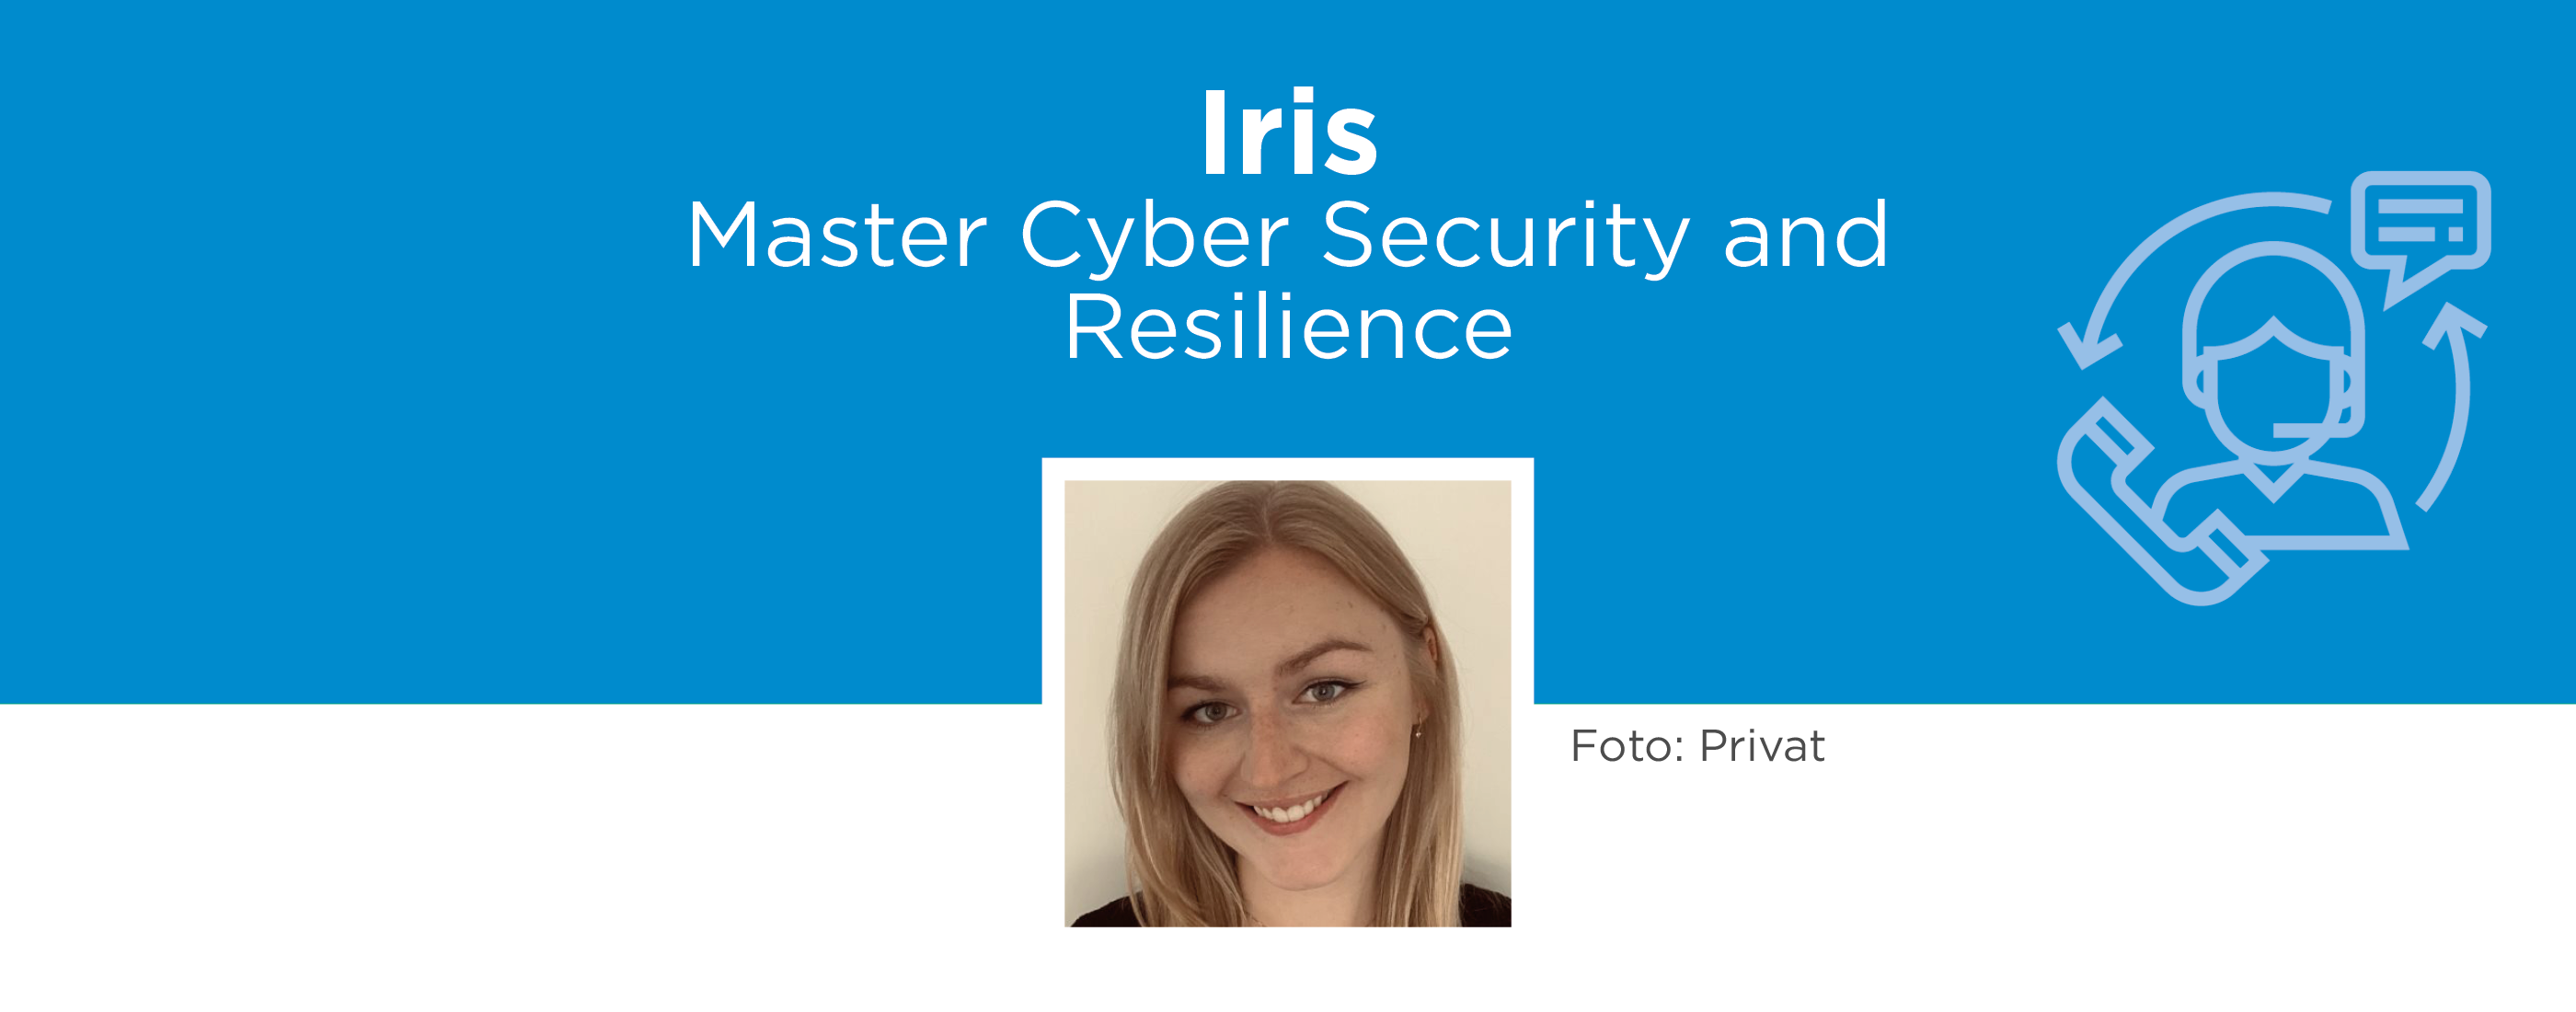 Iris, Master Cyber Security and Resilience